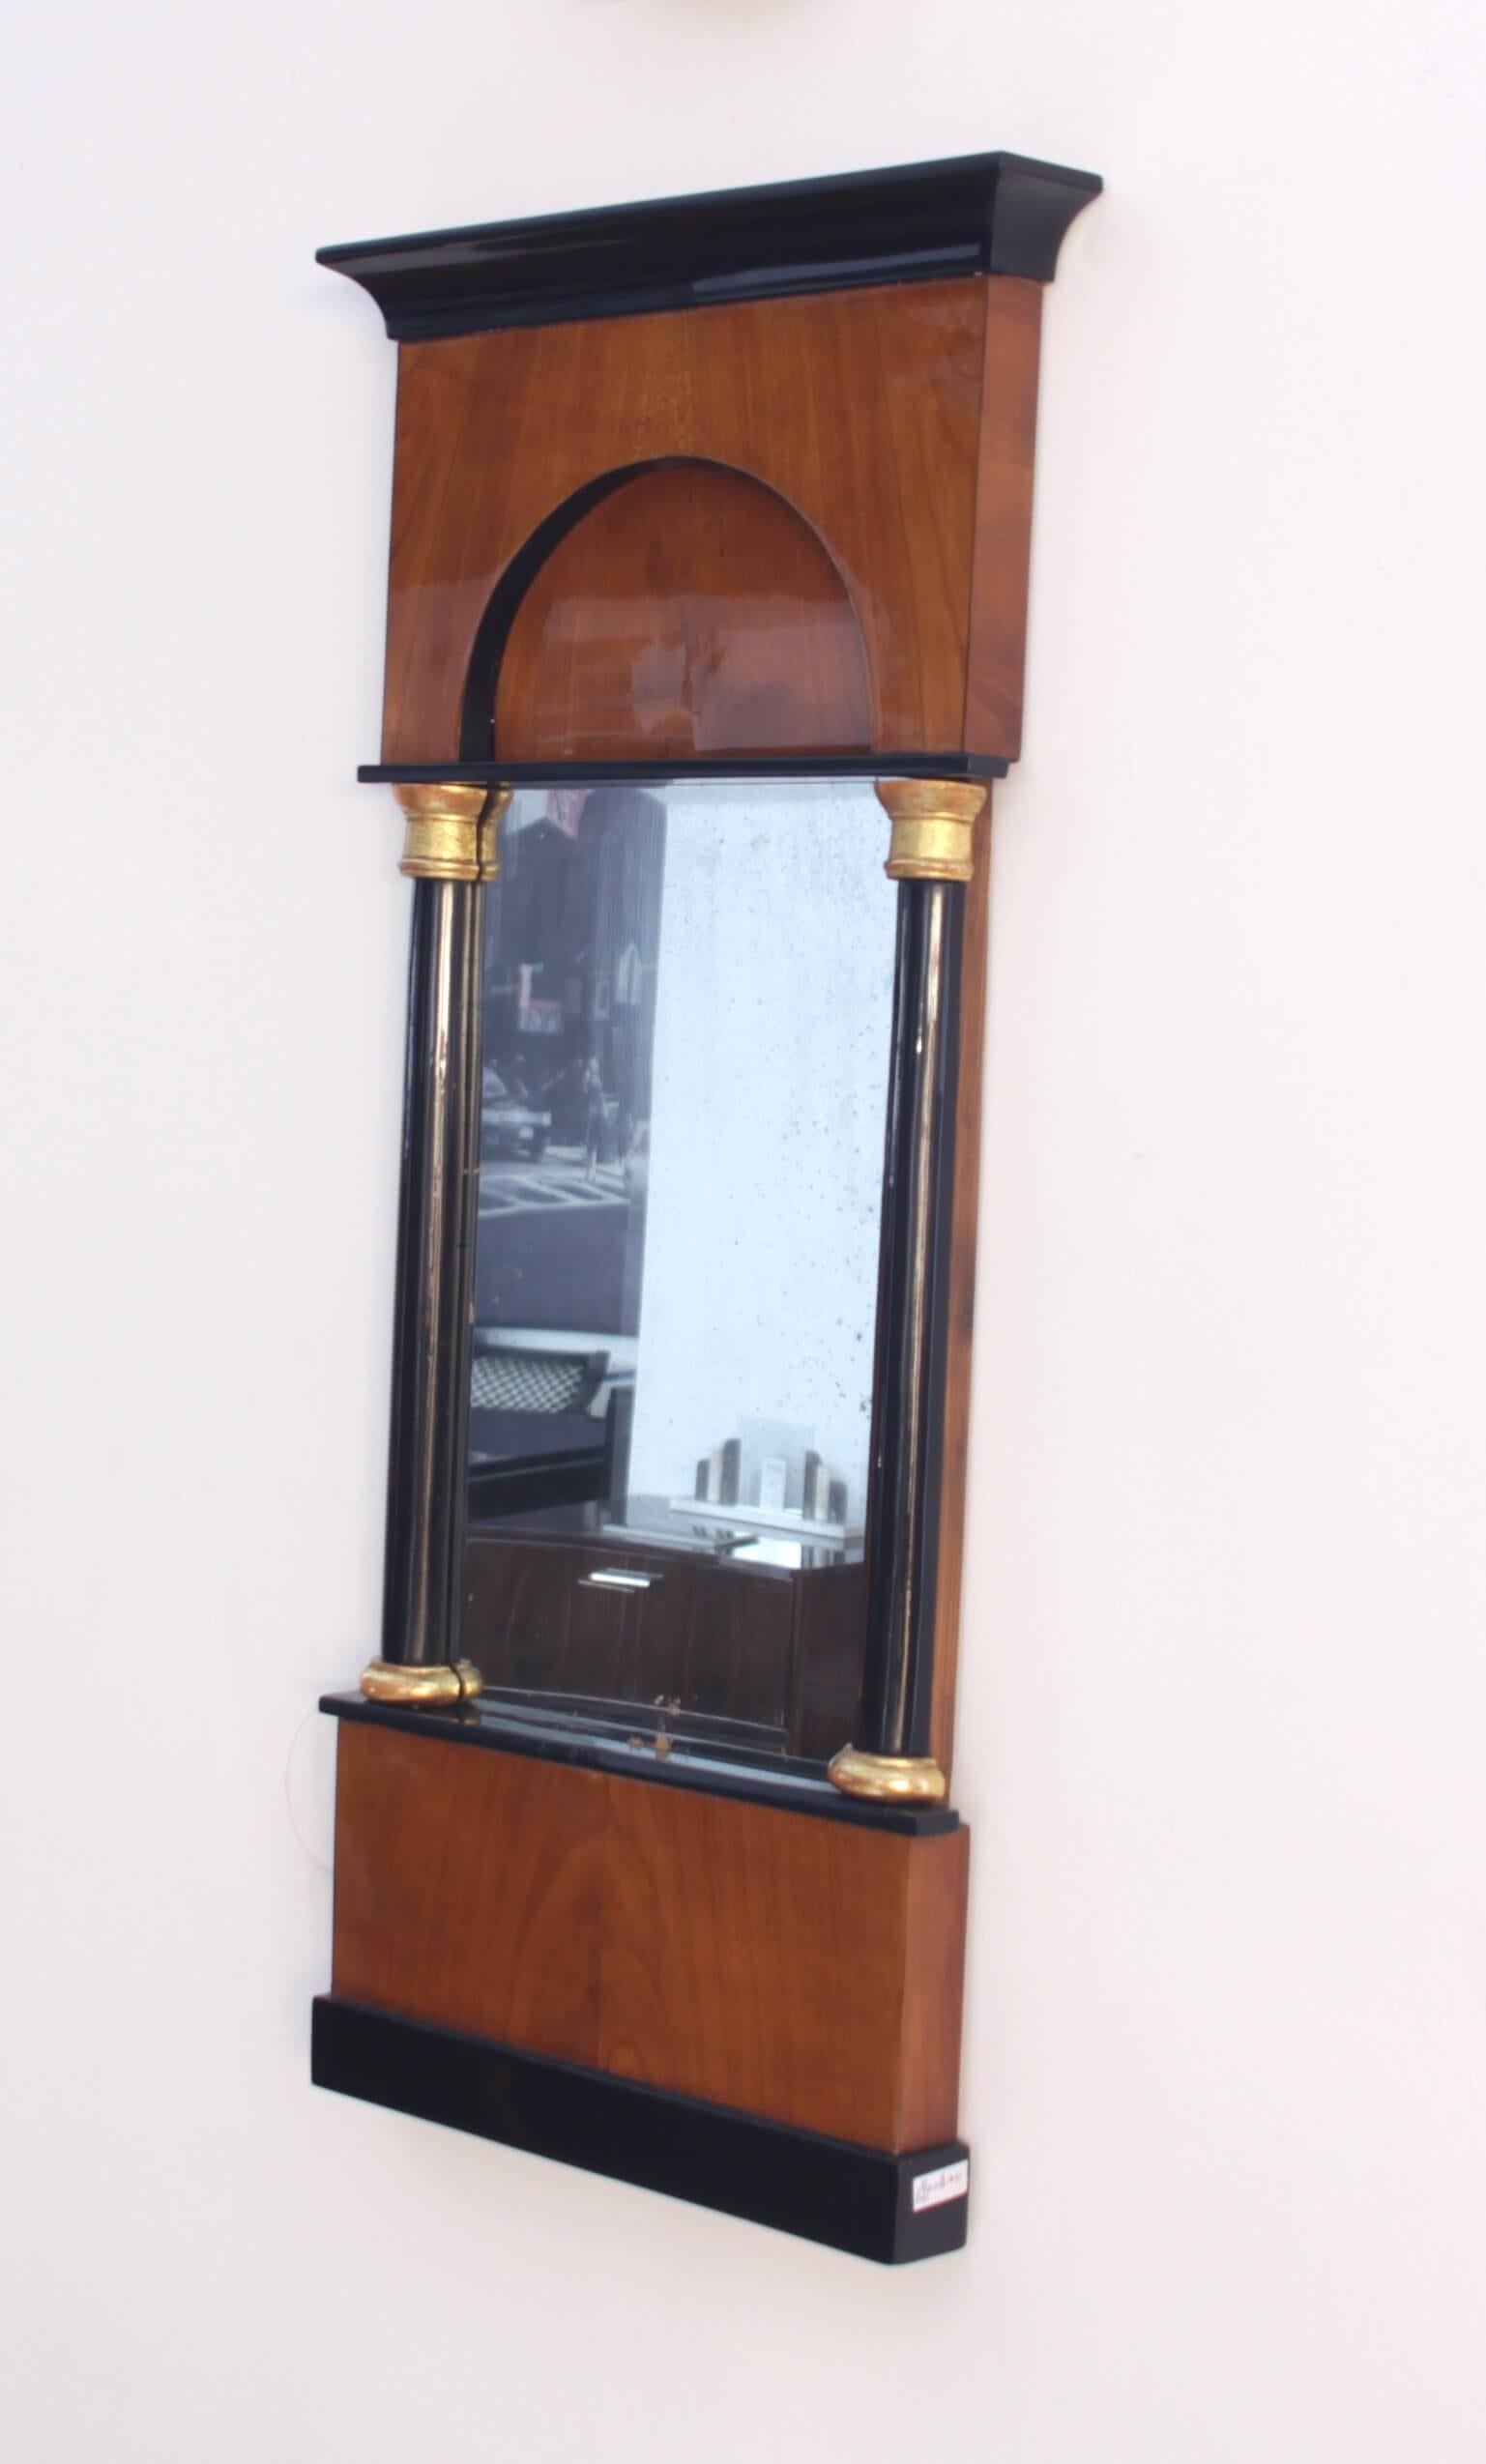 Wonderful petite early Biedermeier mirror from South Germany about 1820

Wood: Book-matched cherry veneer, French polished
Half columns, gold-plated capitels and bases
Segmental arch, partly ebonized.

Old mirror glass.